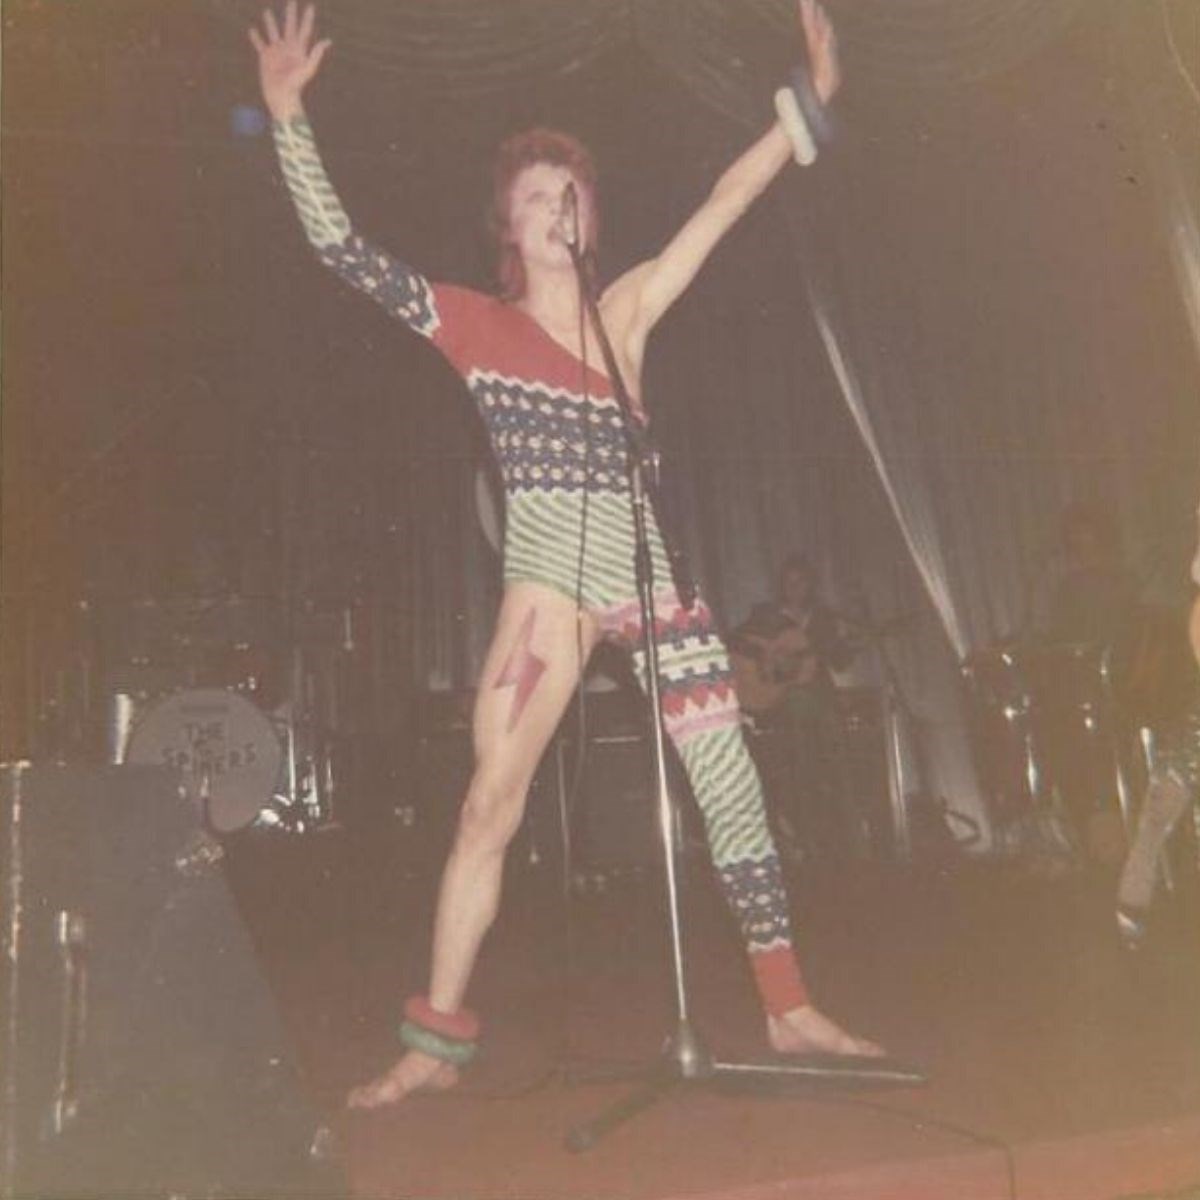 David Bowie at The Empire